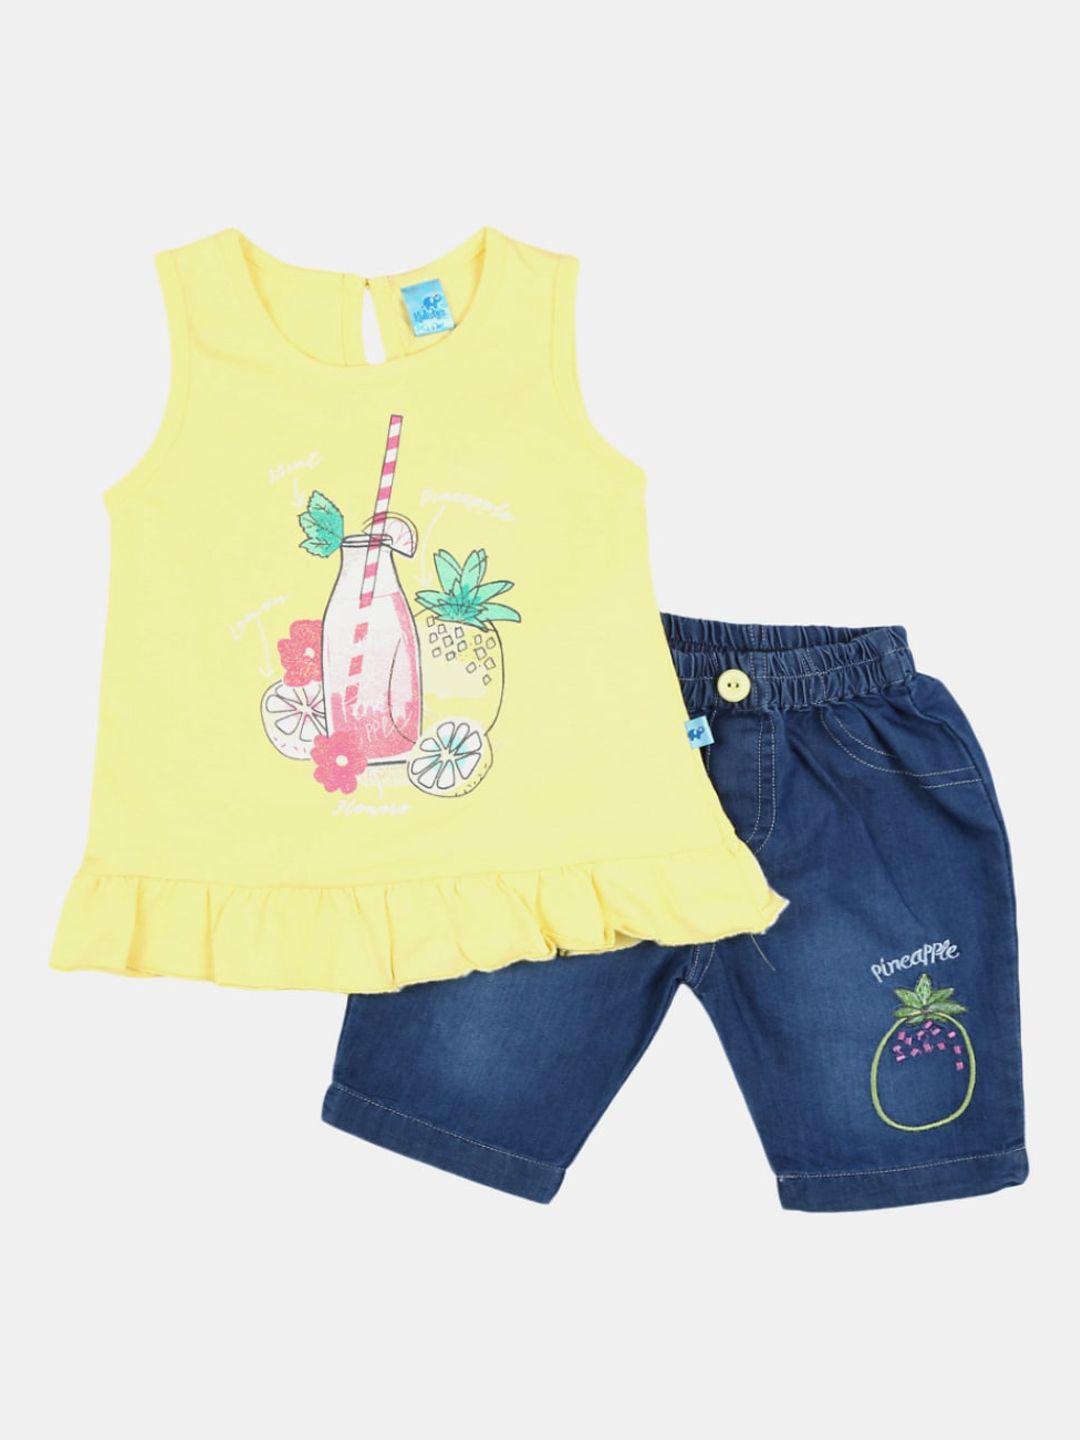 v-mart unisex kids yellow & blue printed top with shorts